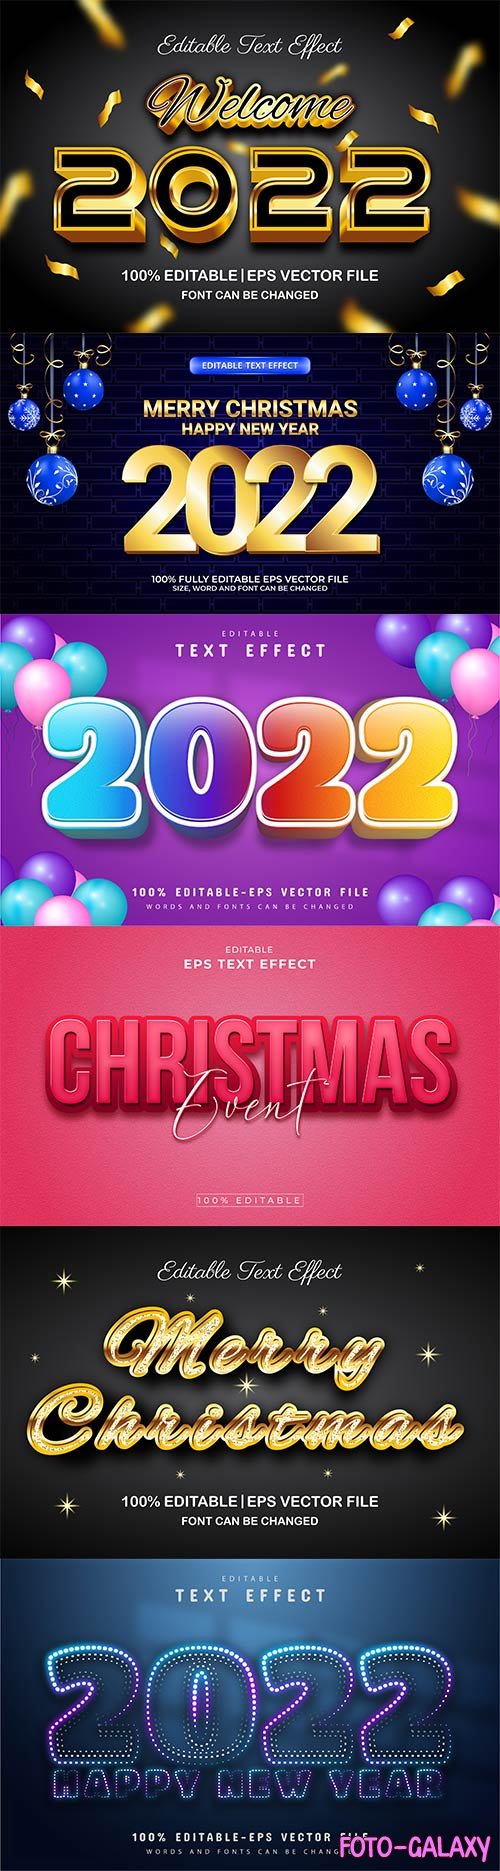 Merry christmas and happy new year 2022 editable vector text effects vol 7